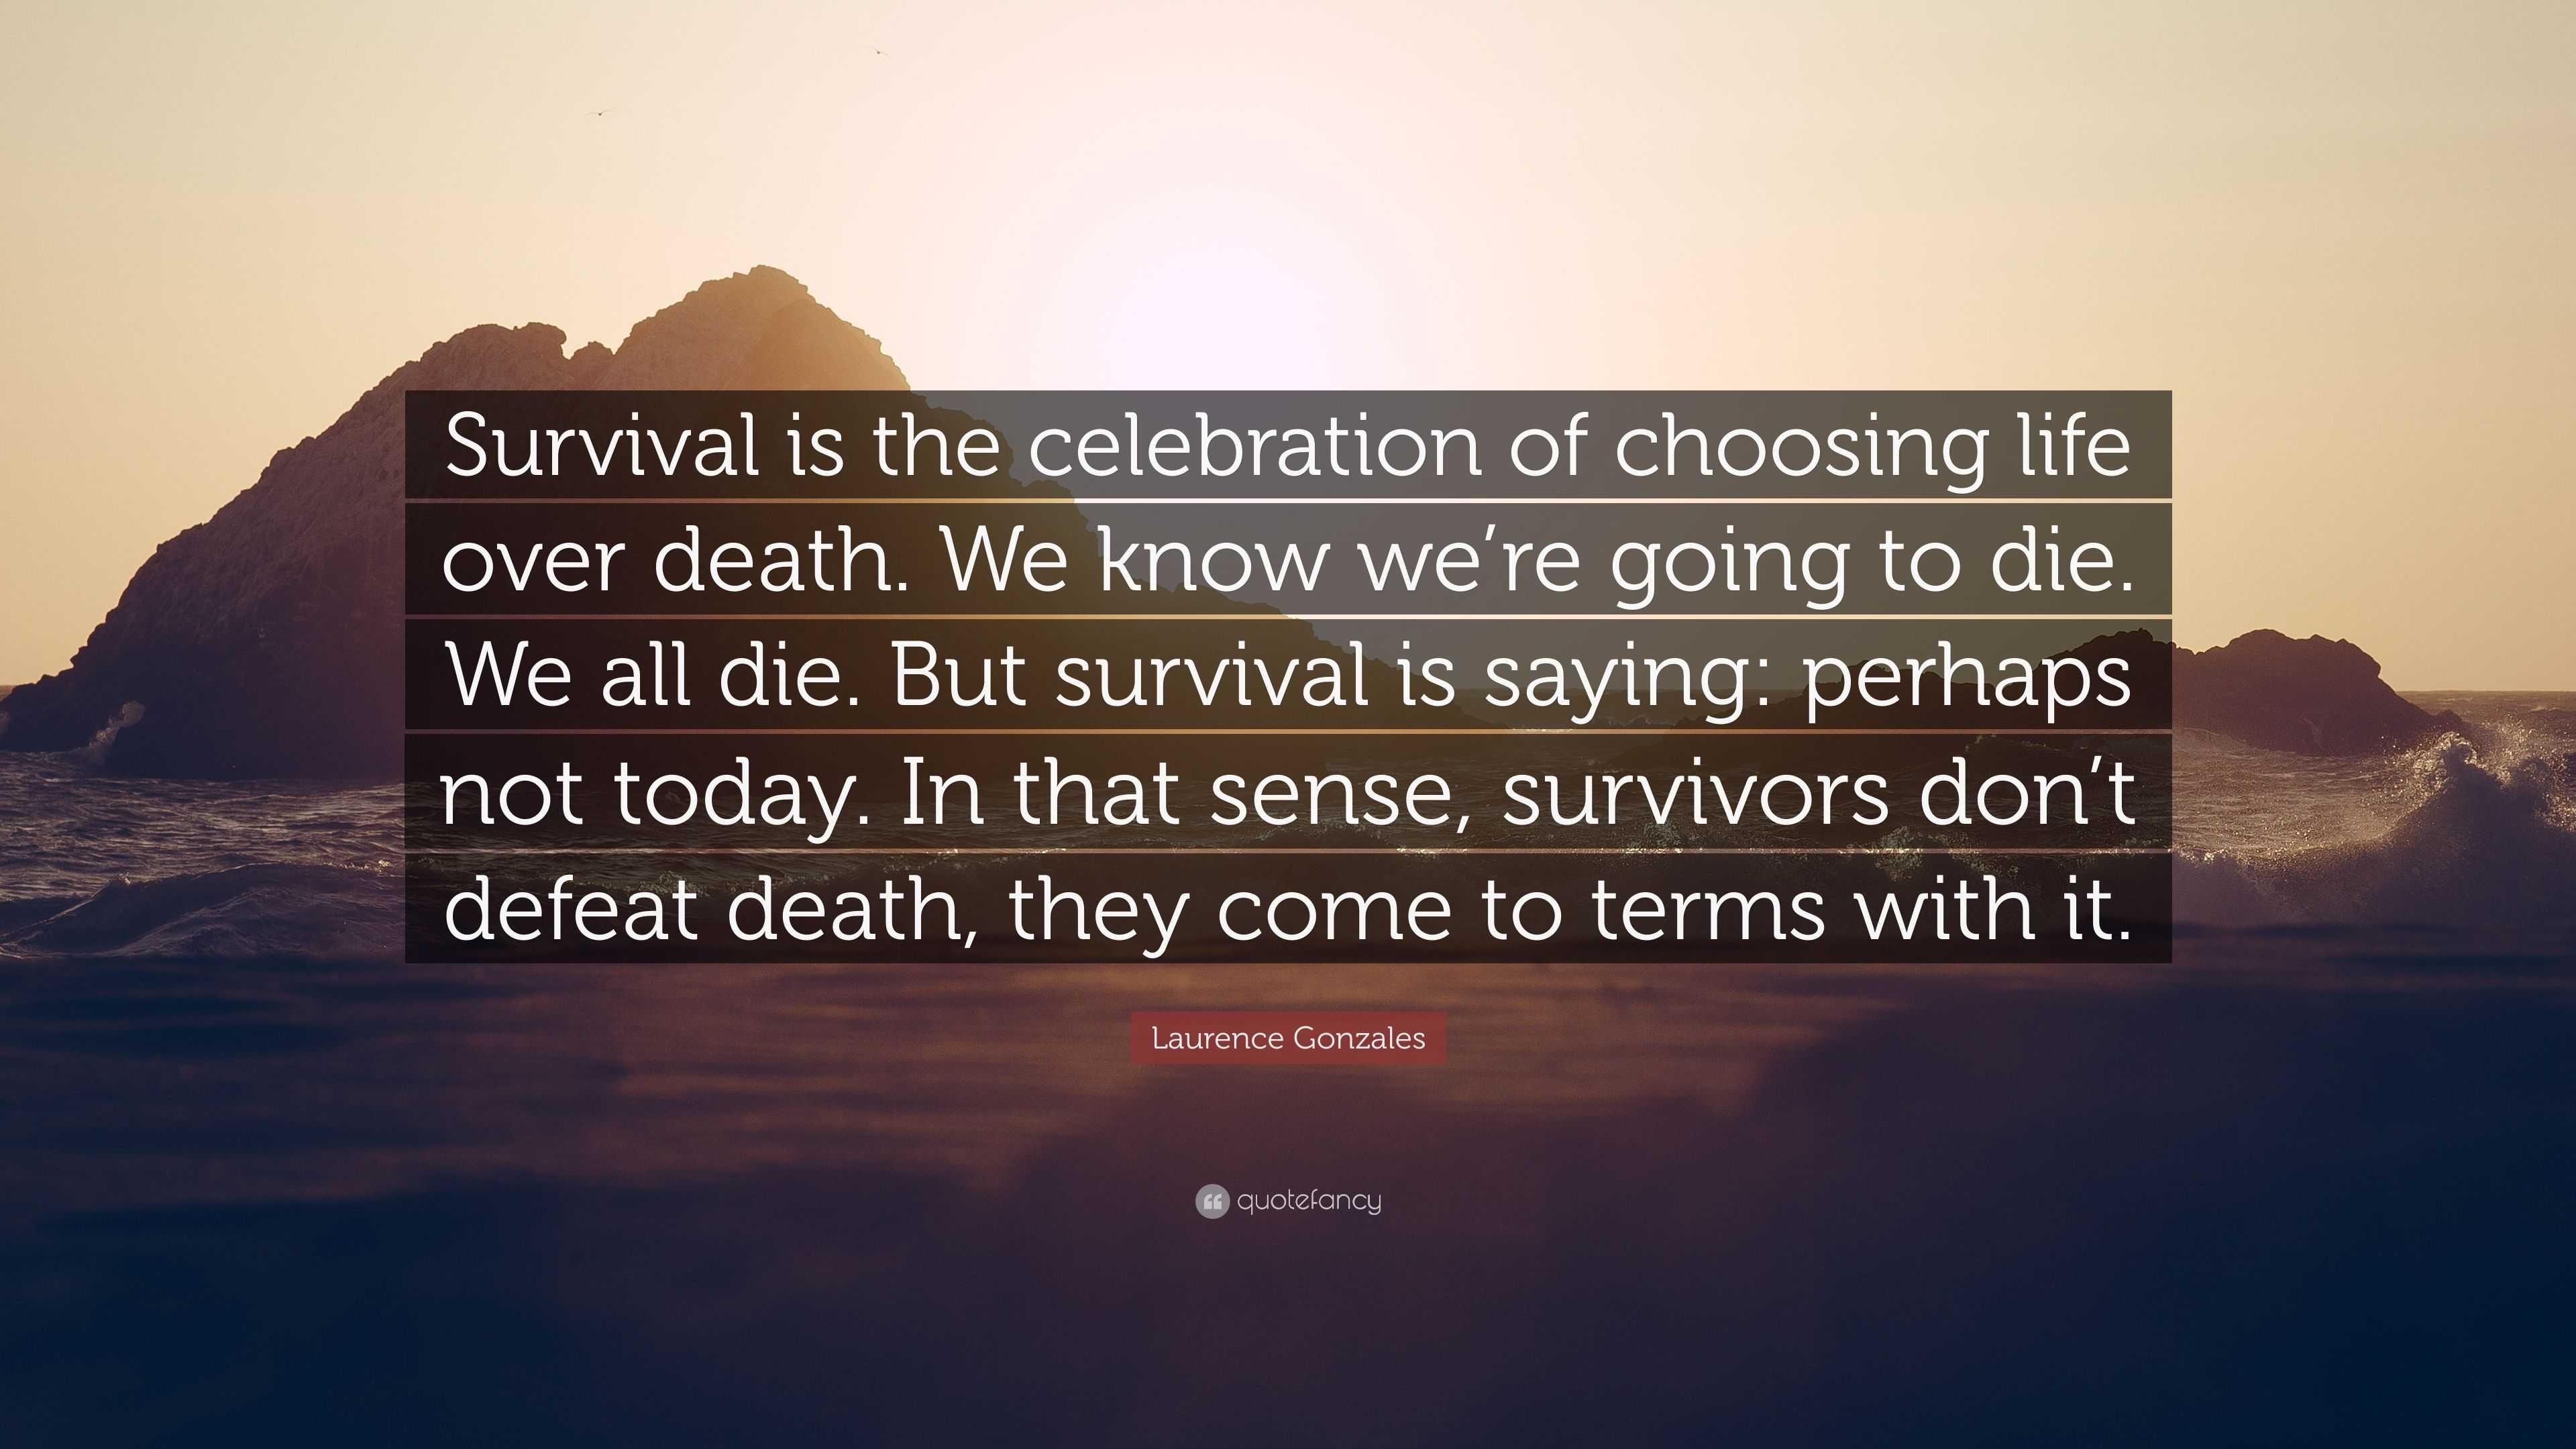 Laurence Gonzales Quote “Survival is the celebration of